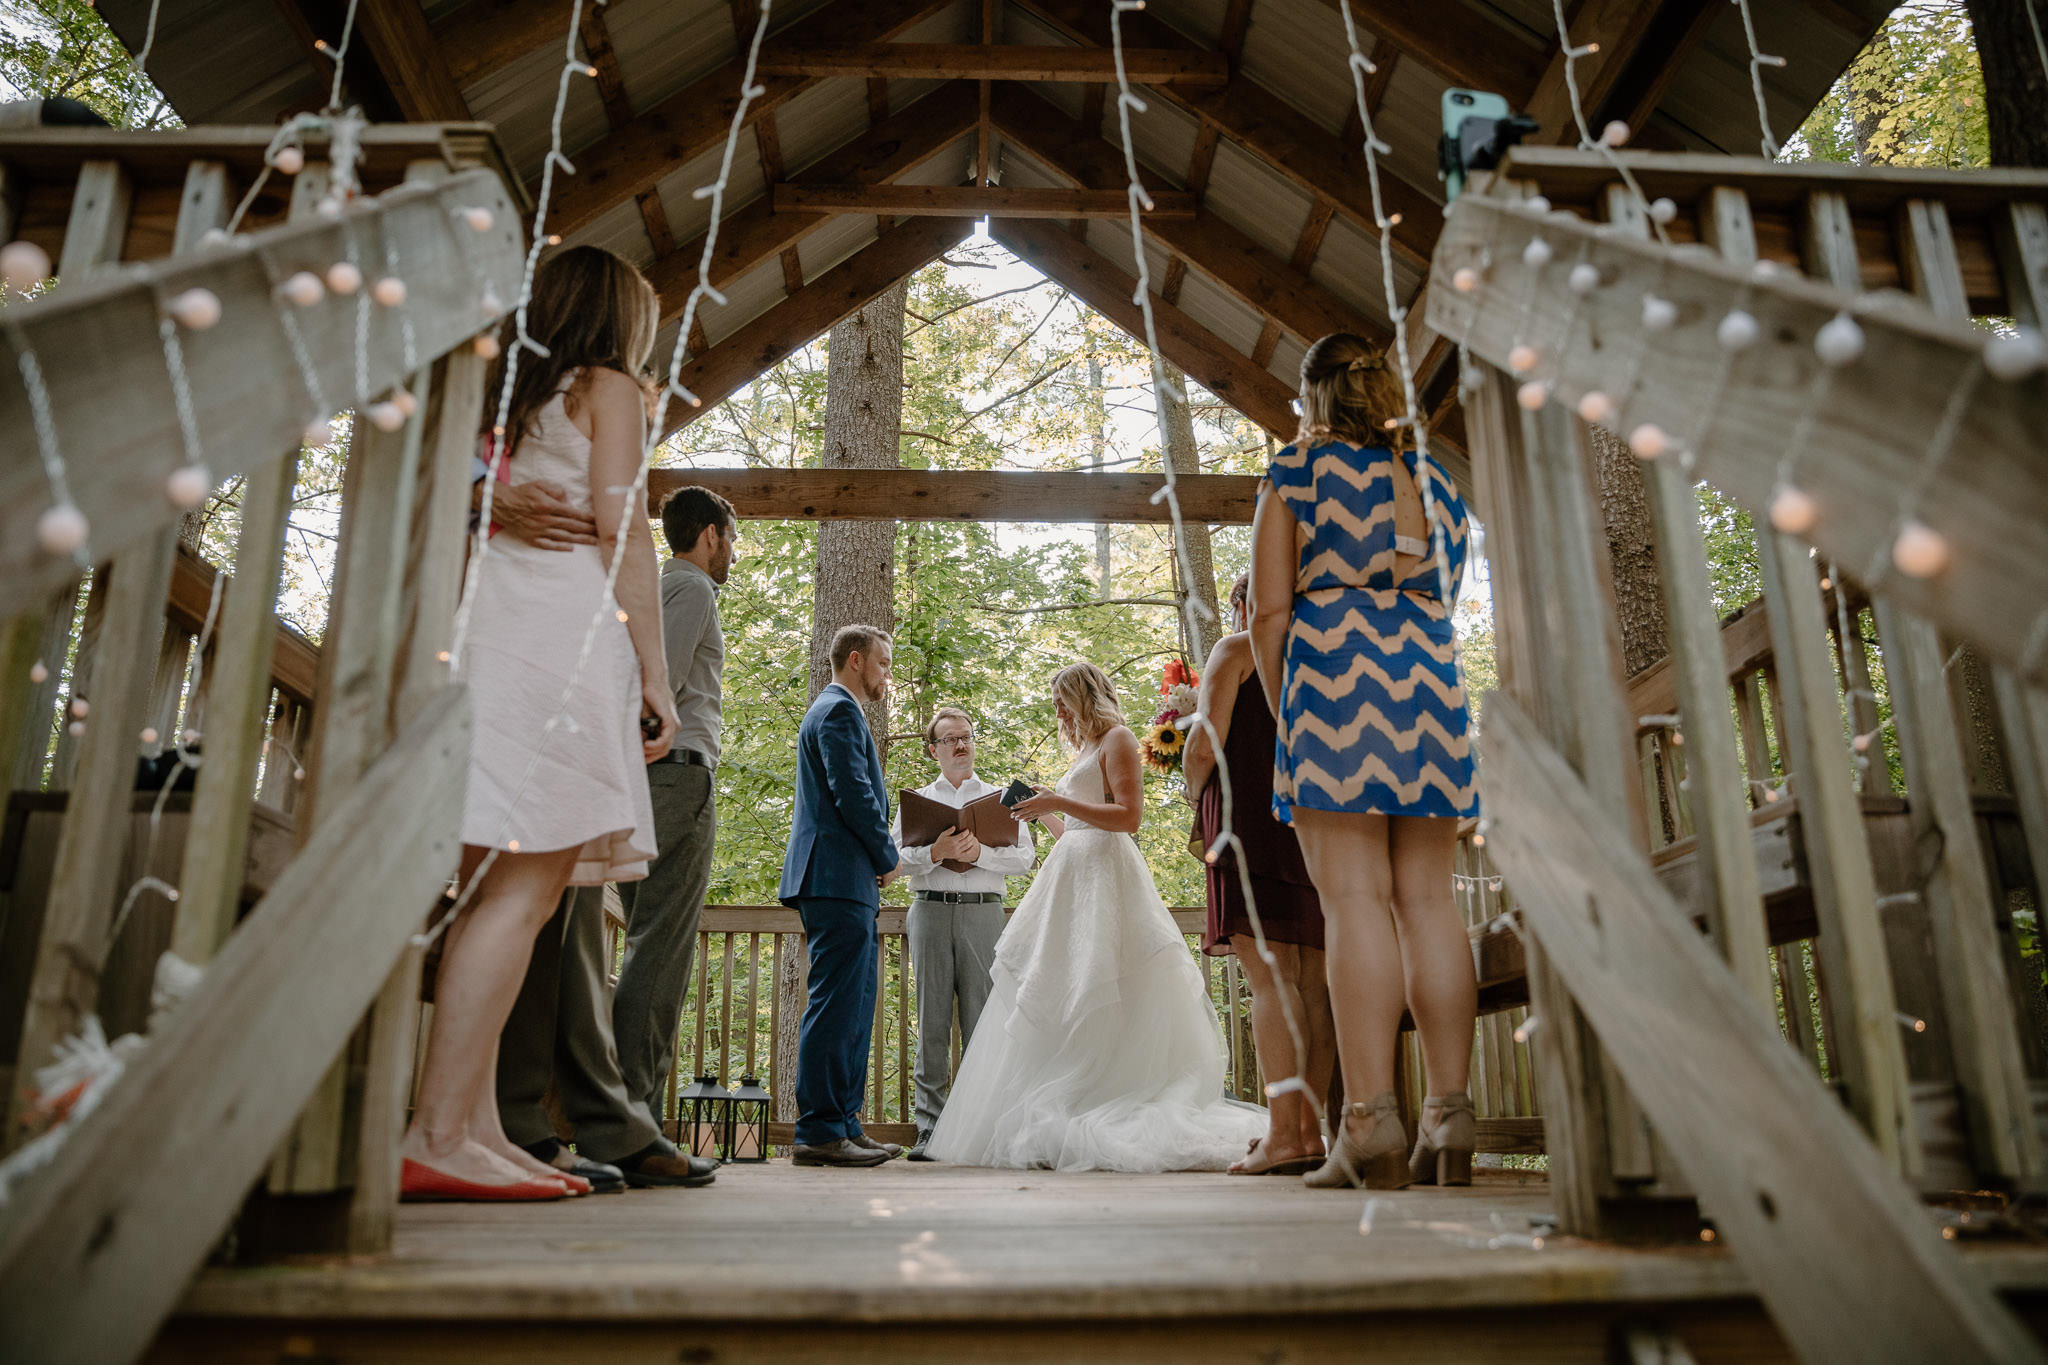 Beautiful treehouse elopement in New Hampshire | New Hampshire elopement photographer | Elopement planning with wild and wed